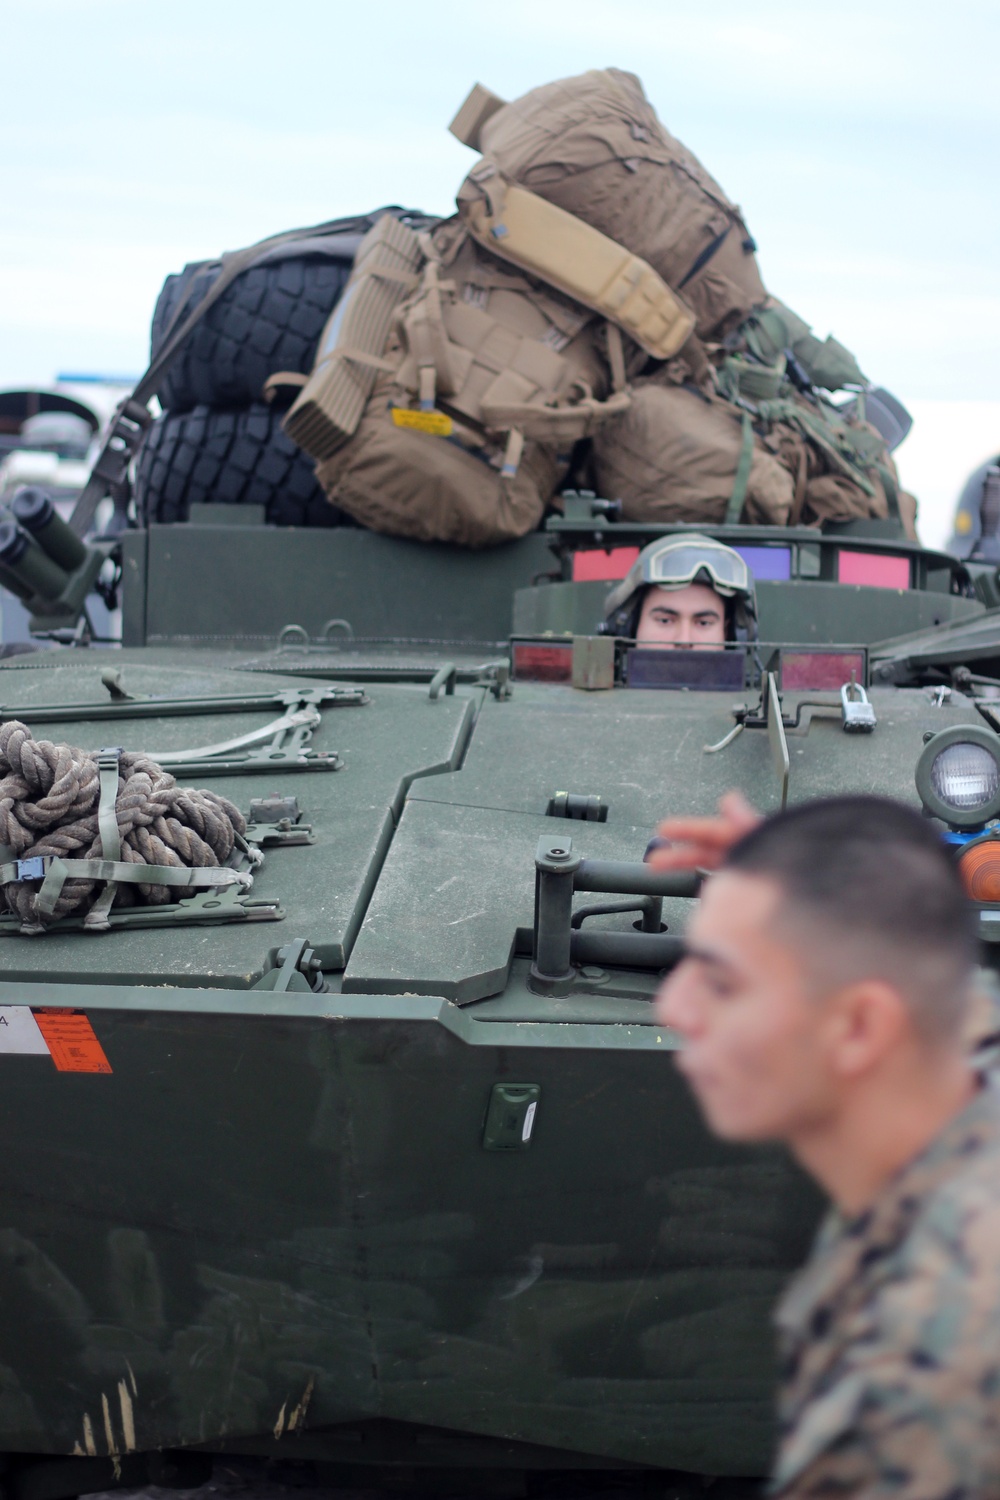 2nd LAR returns to Camp Lejeune following Trident Juncture